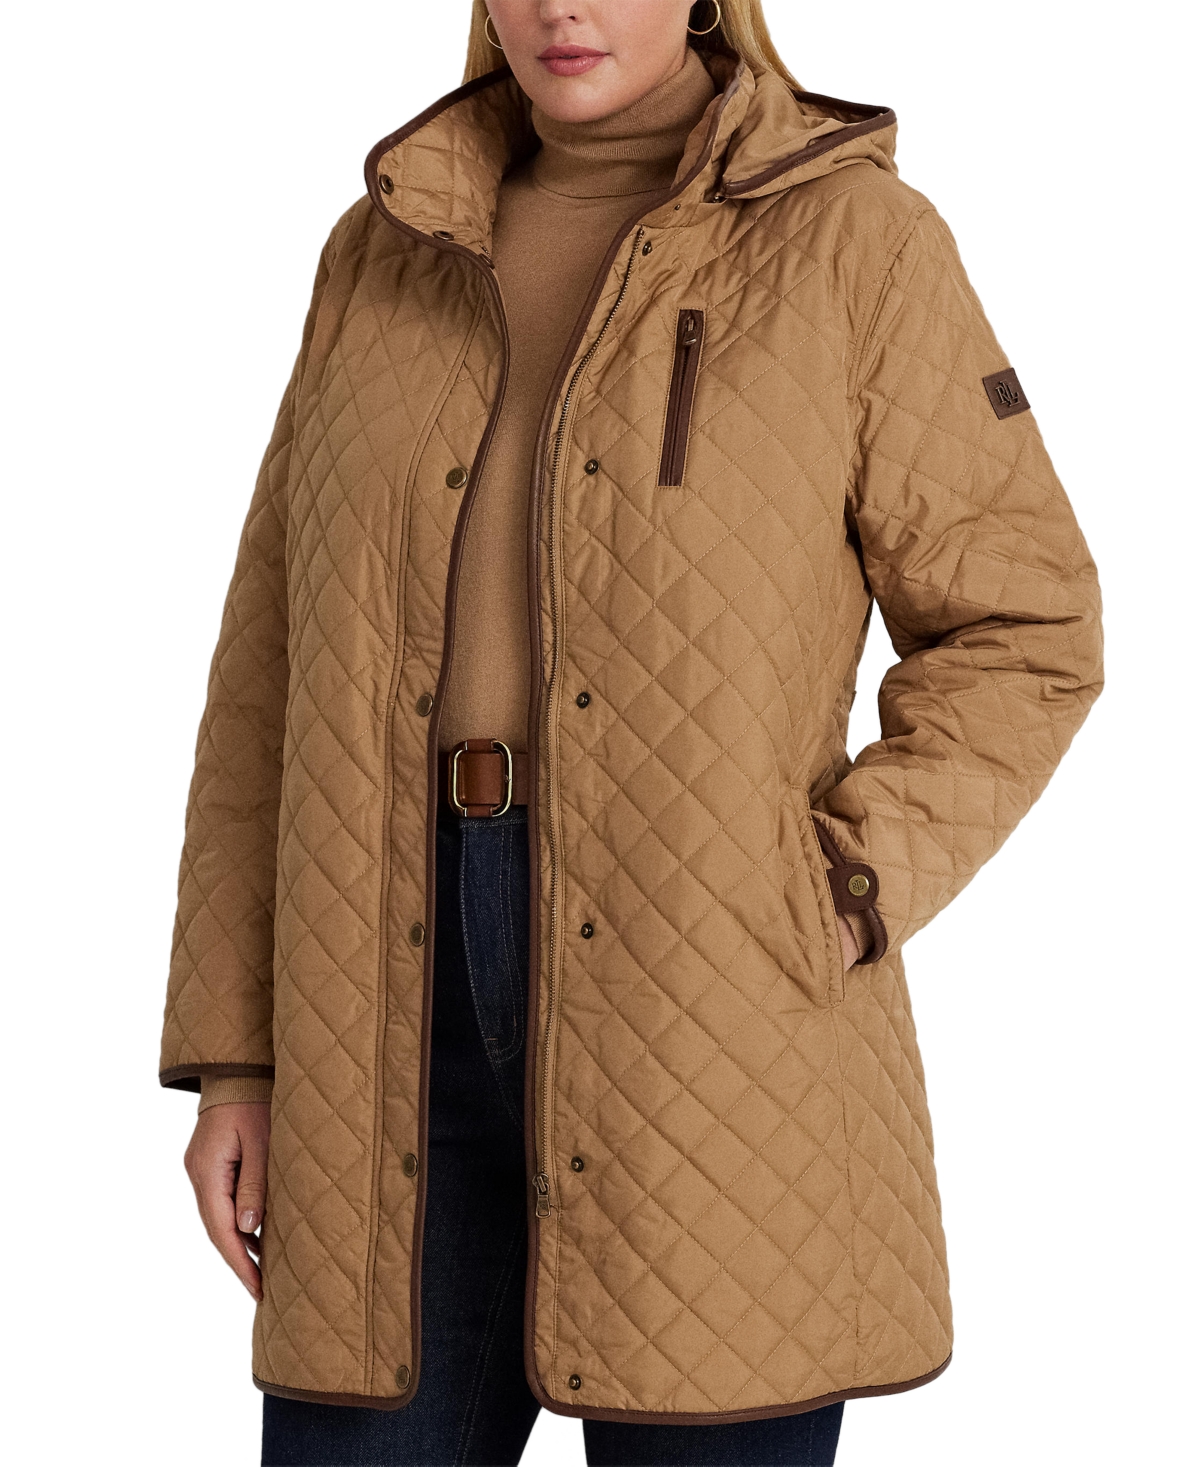 Women's Quilted Coat, Created for Macy's